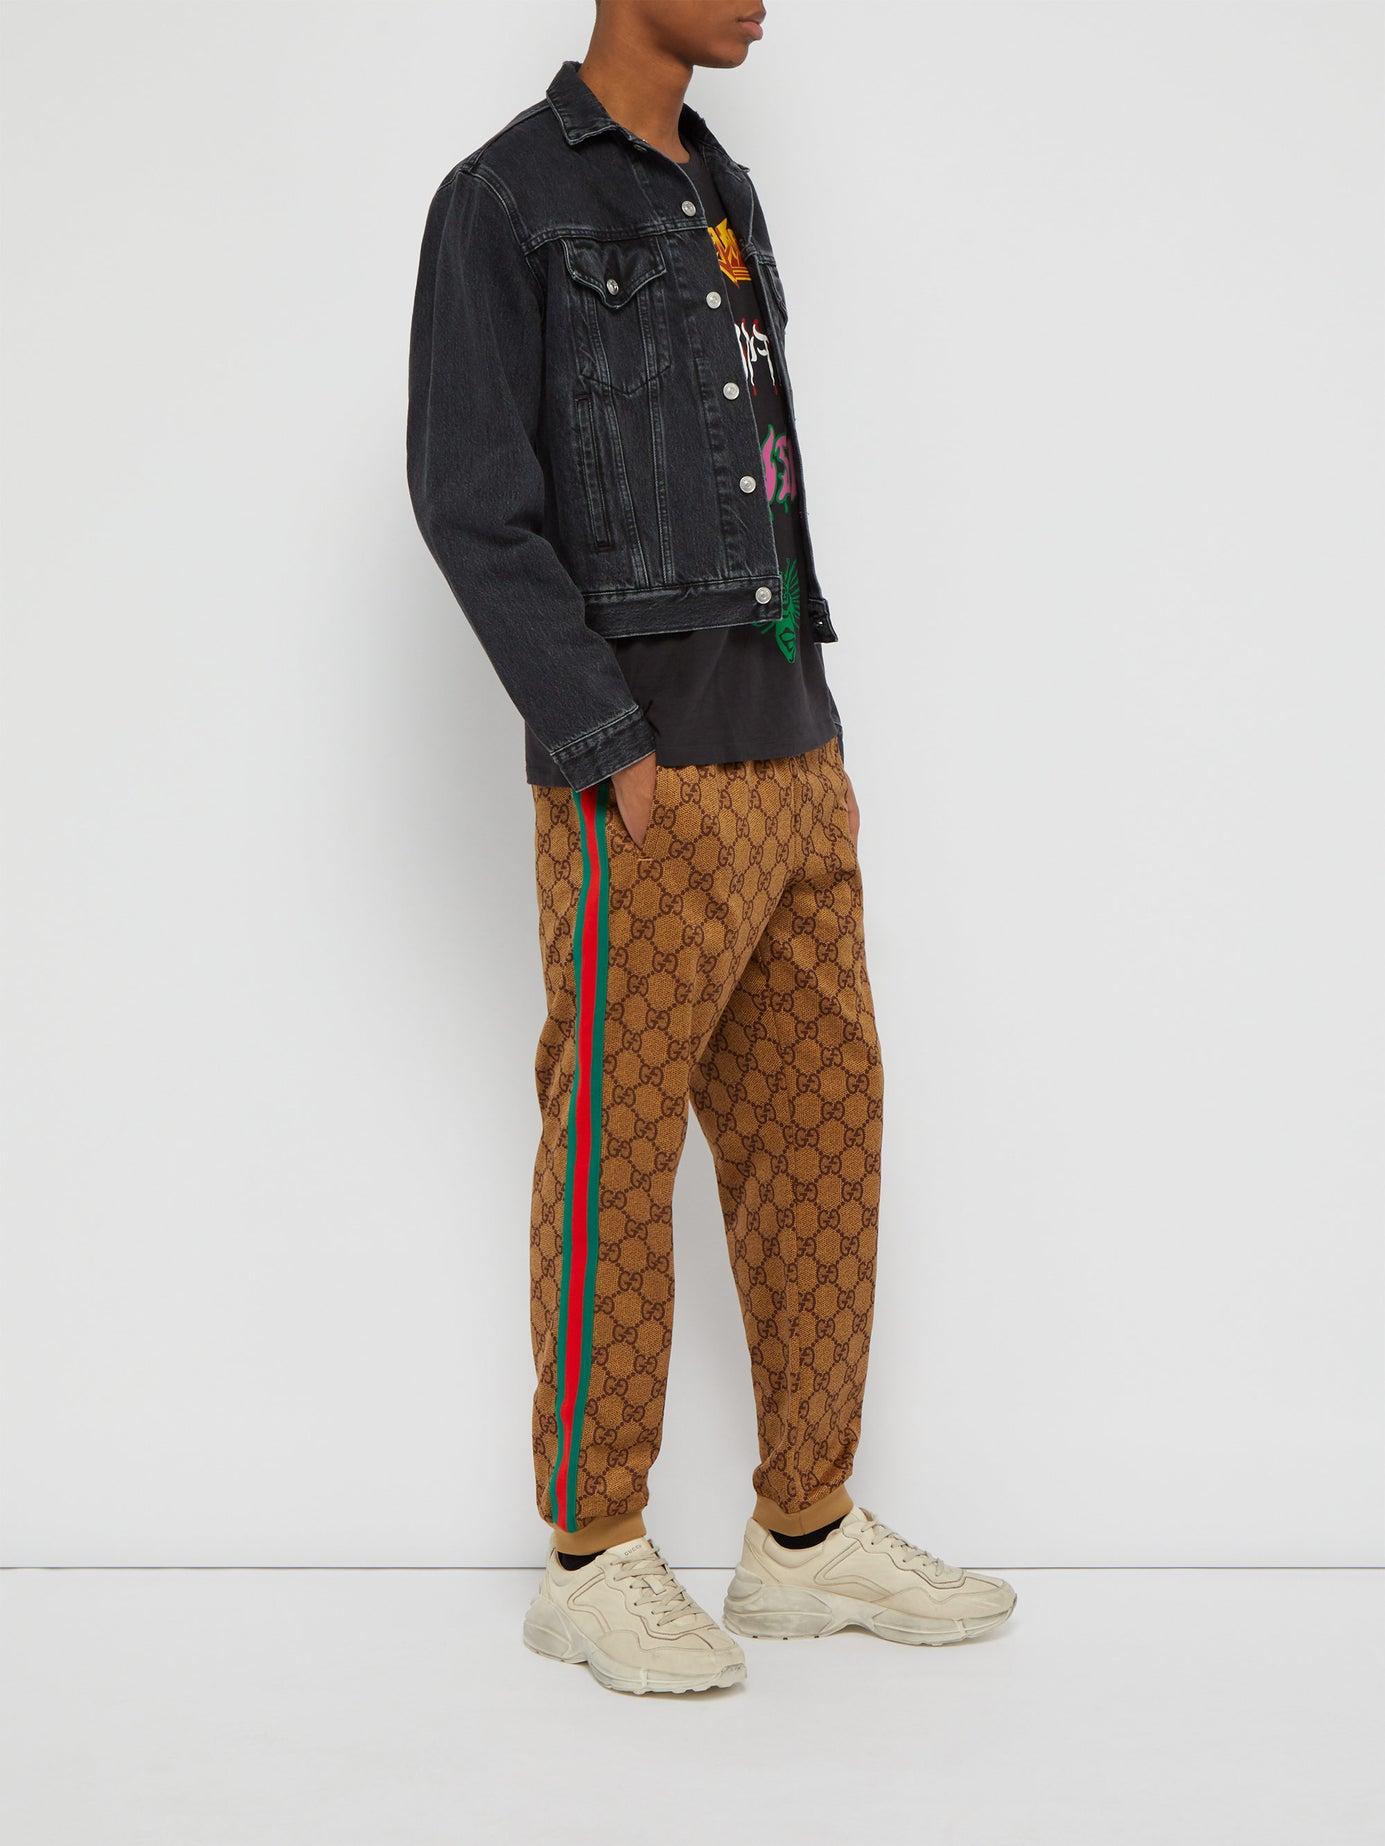 Gucci Gg Supreme Web-stripe Track Pants in Camel (Brown) for Men - Lyst